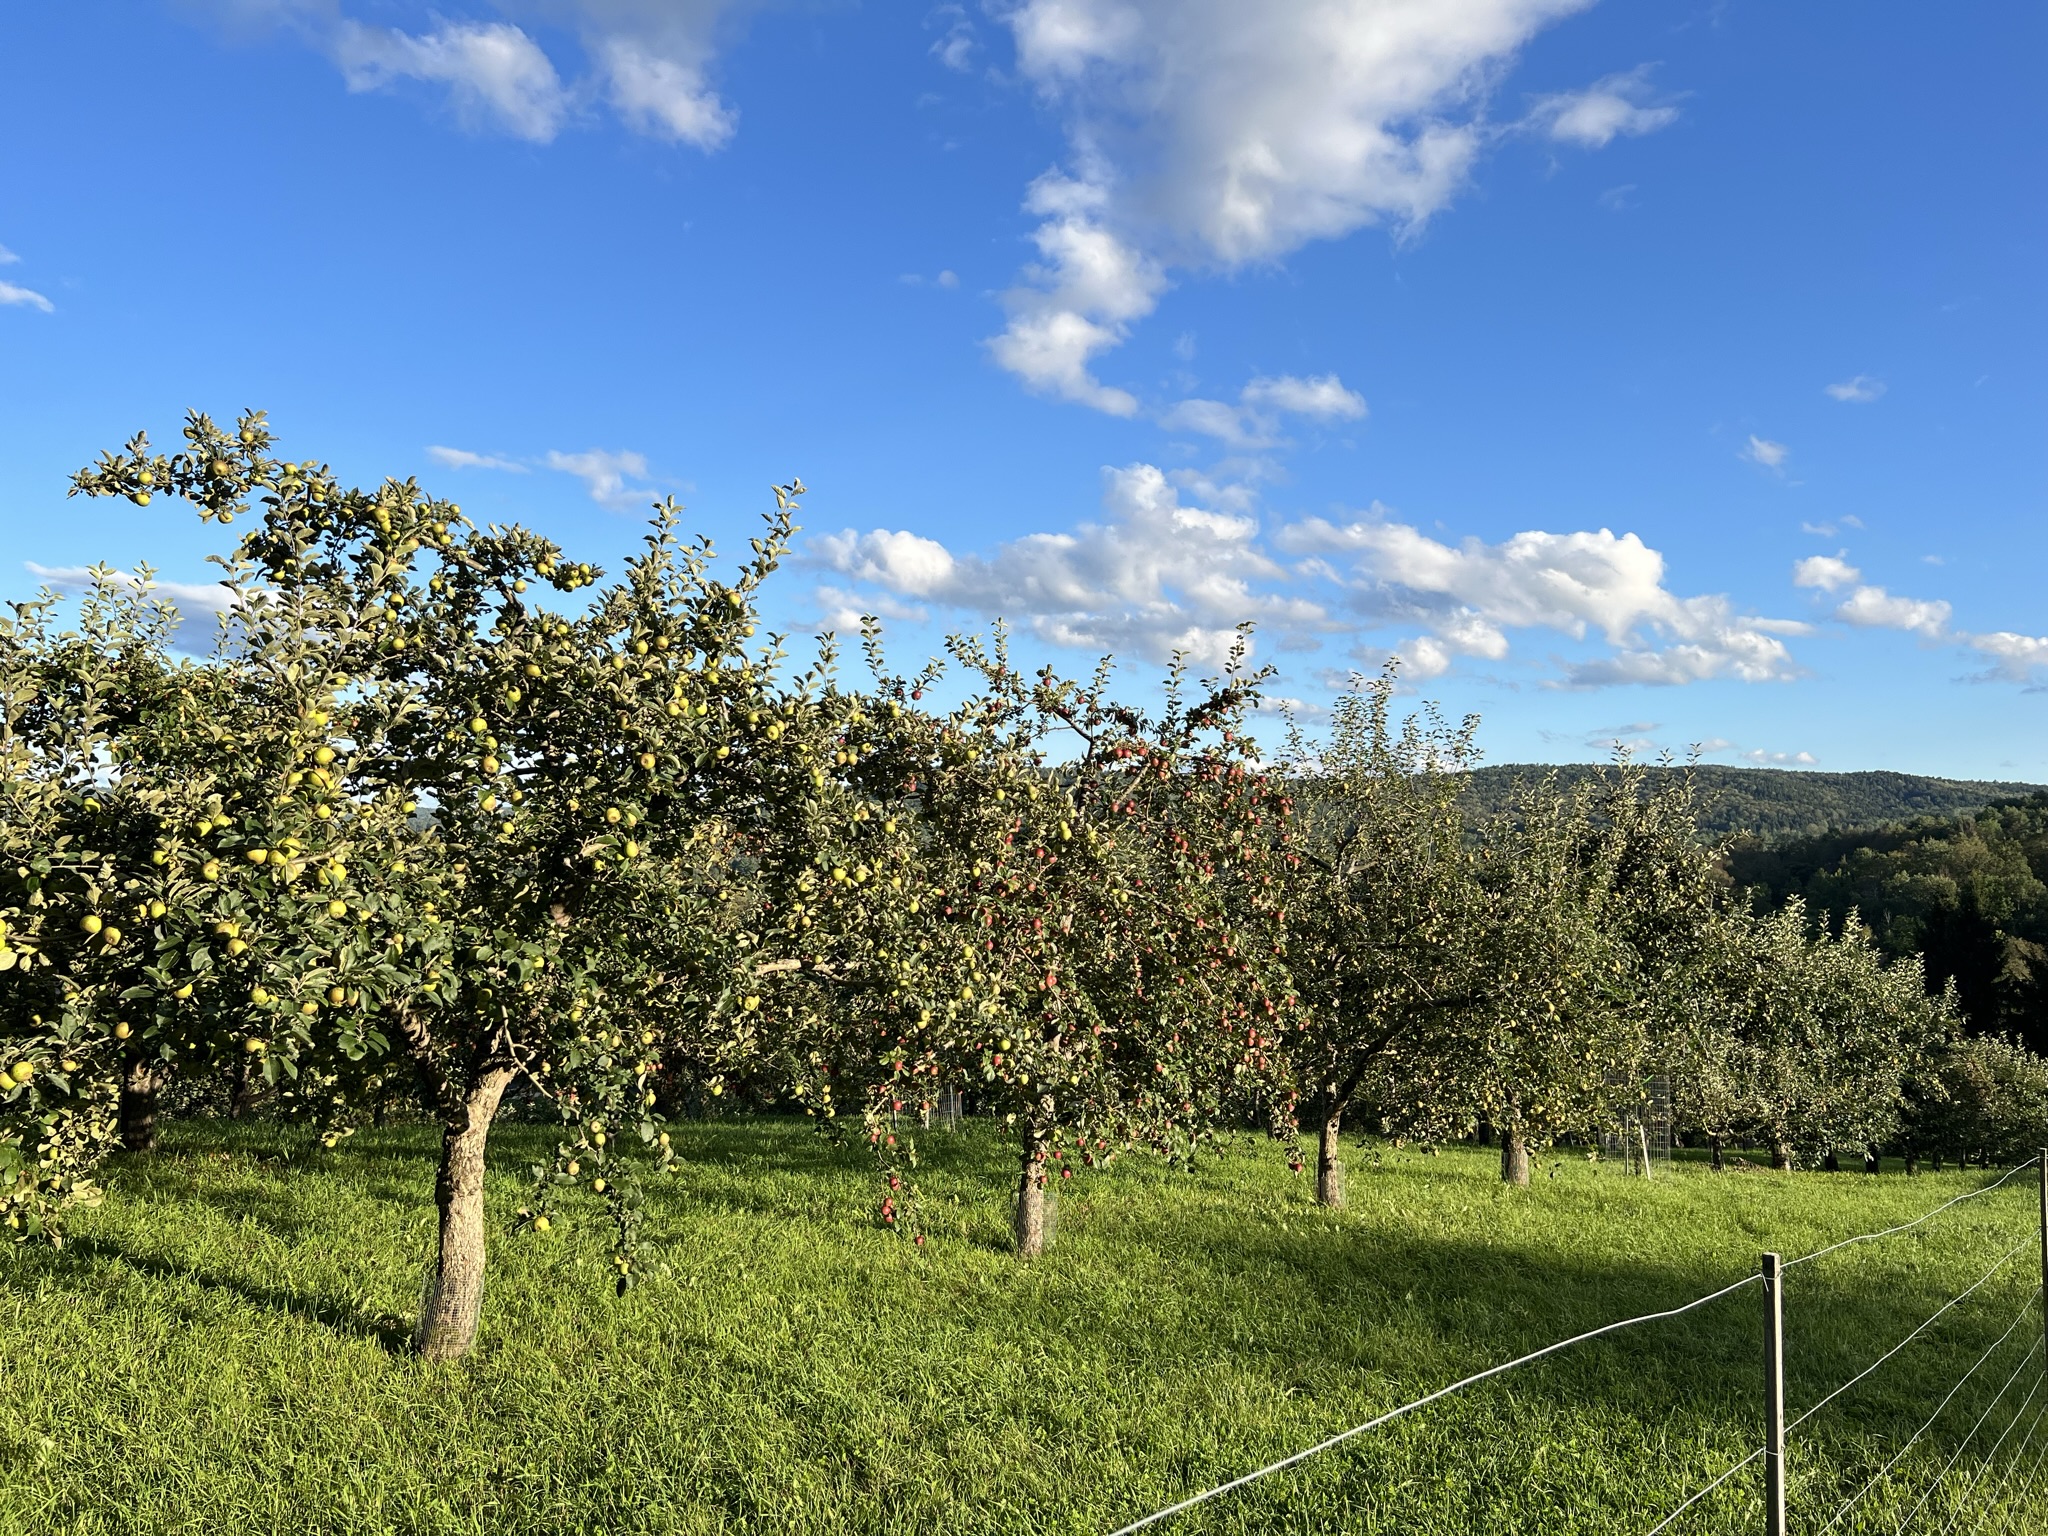 Whitman Brook Orchard in Quechee, Vermont